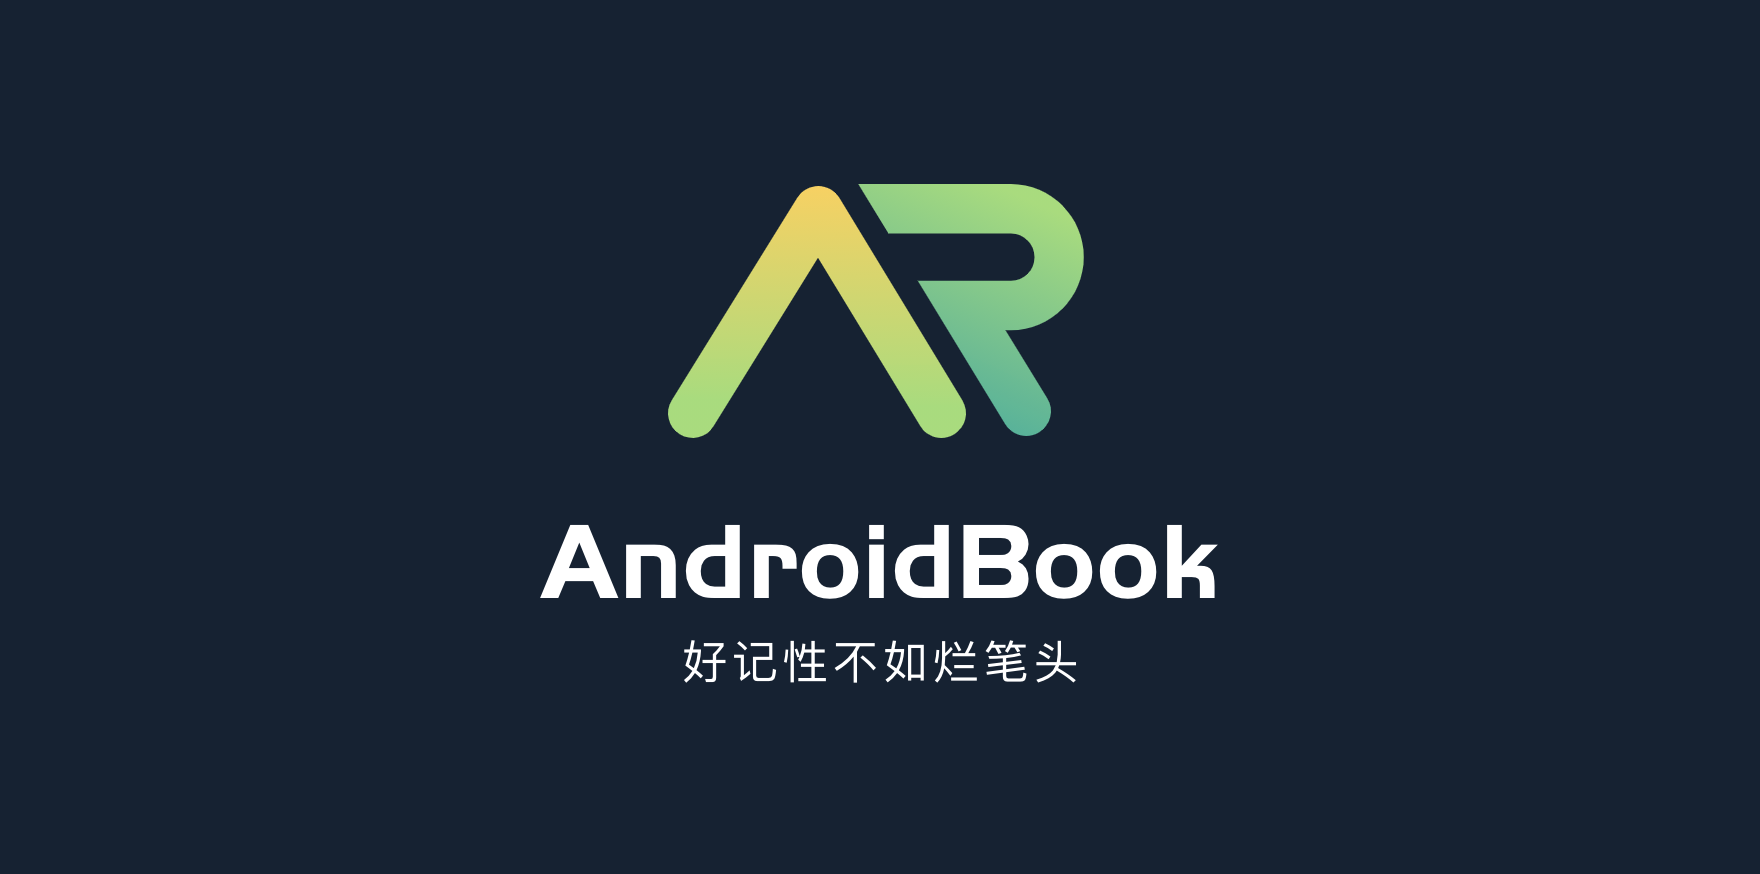 AndroidBook